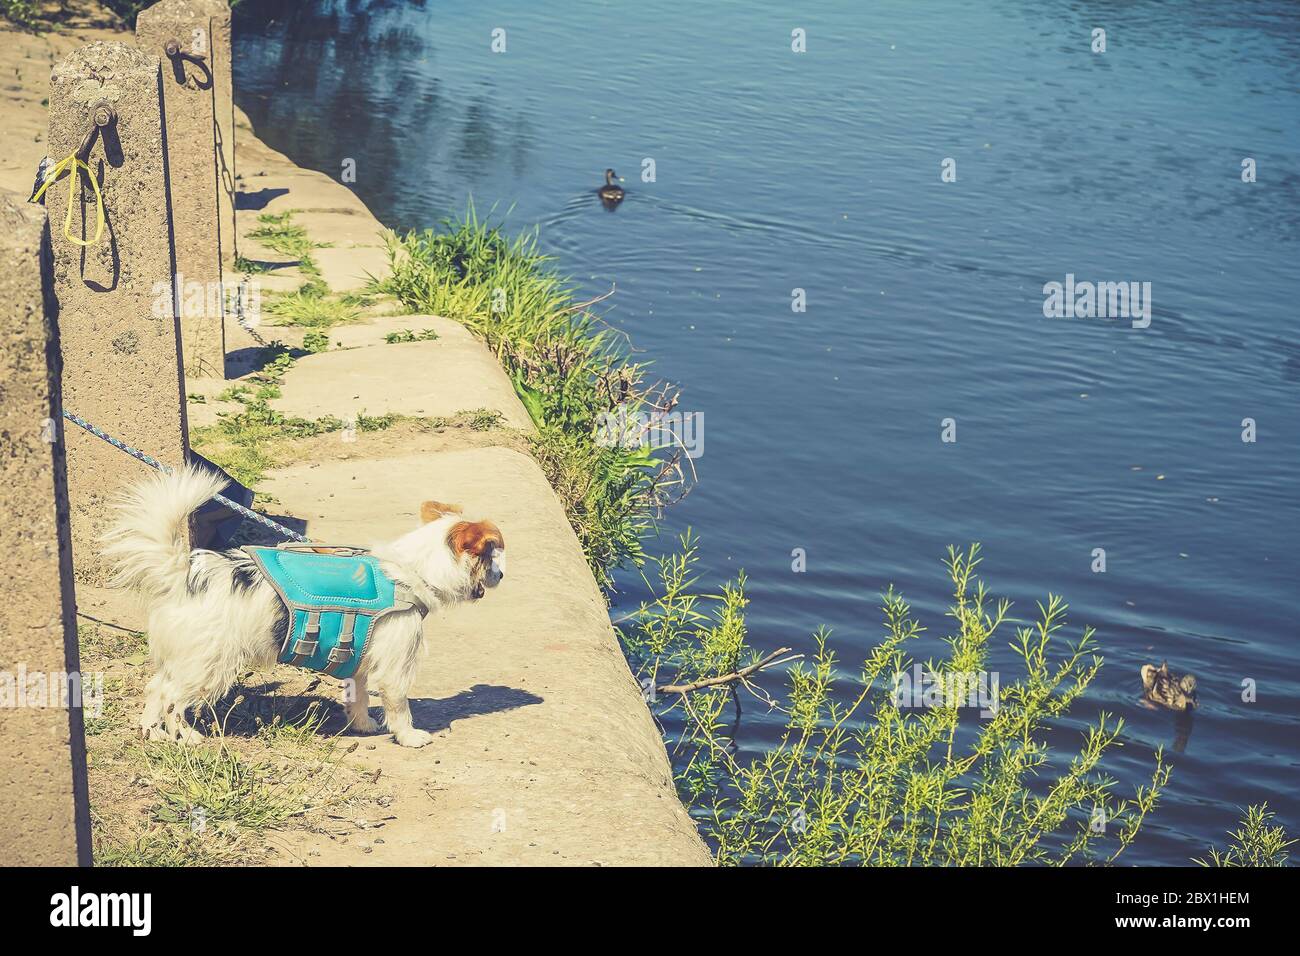 British summer vacation. Cute pet dog in safety lifejacket stands by the side of a UK river watching the ducks. Stock Photo